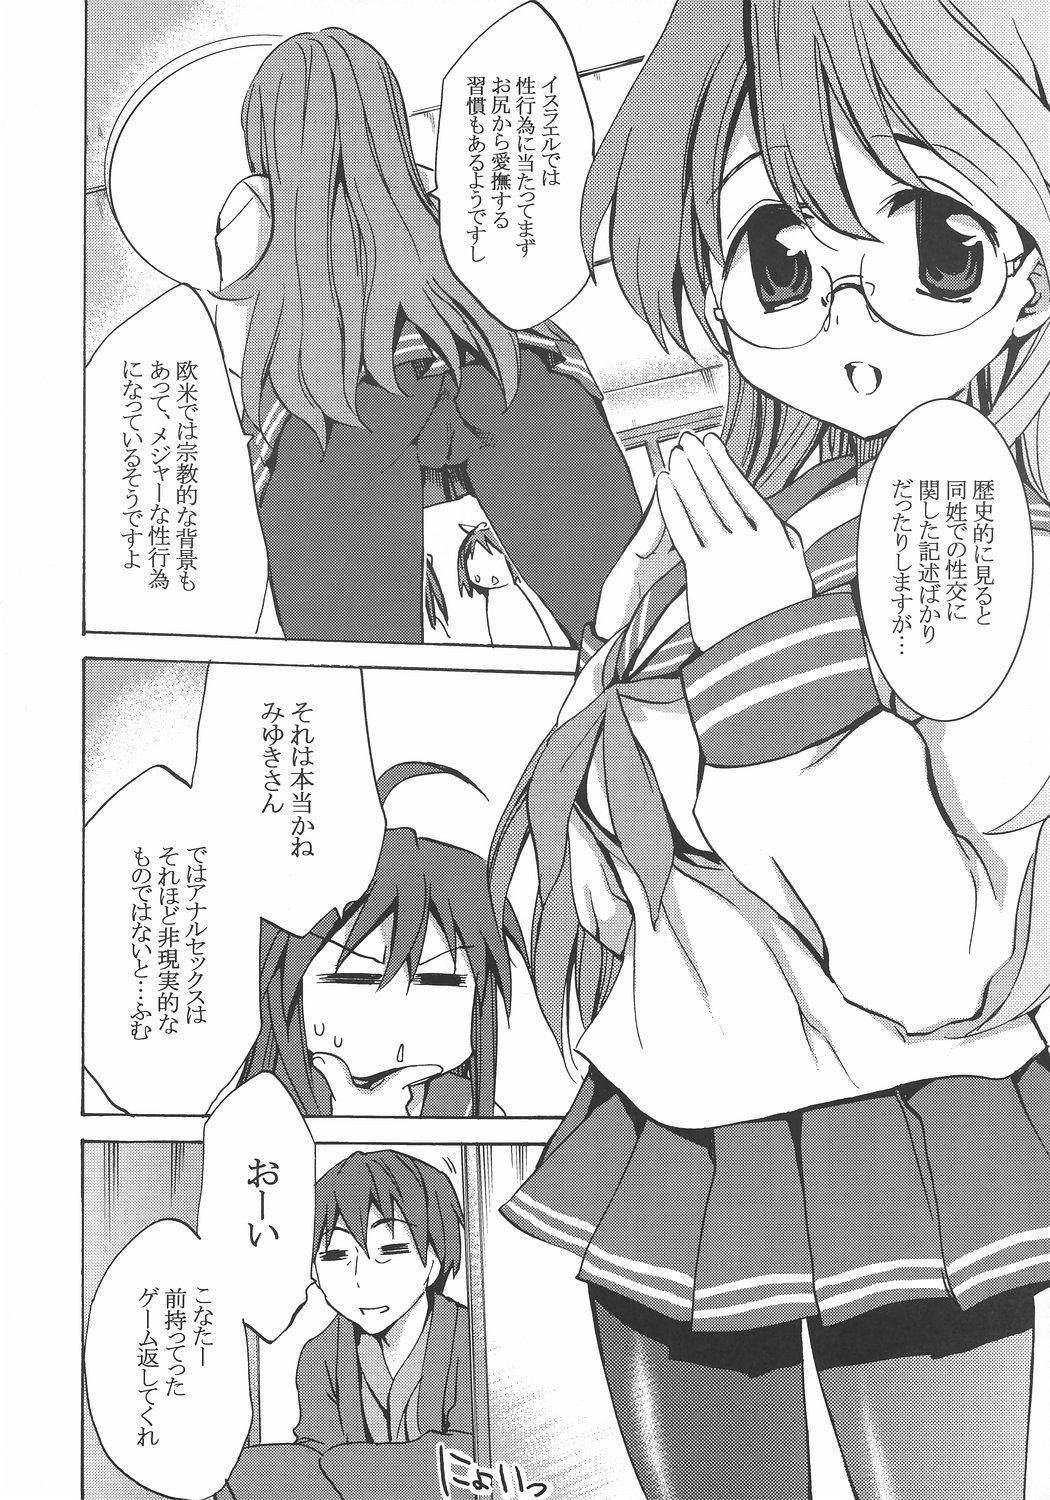 Asses Megane, Megane!! - Lucky star Pete - Page 7